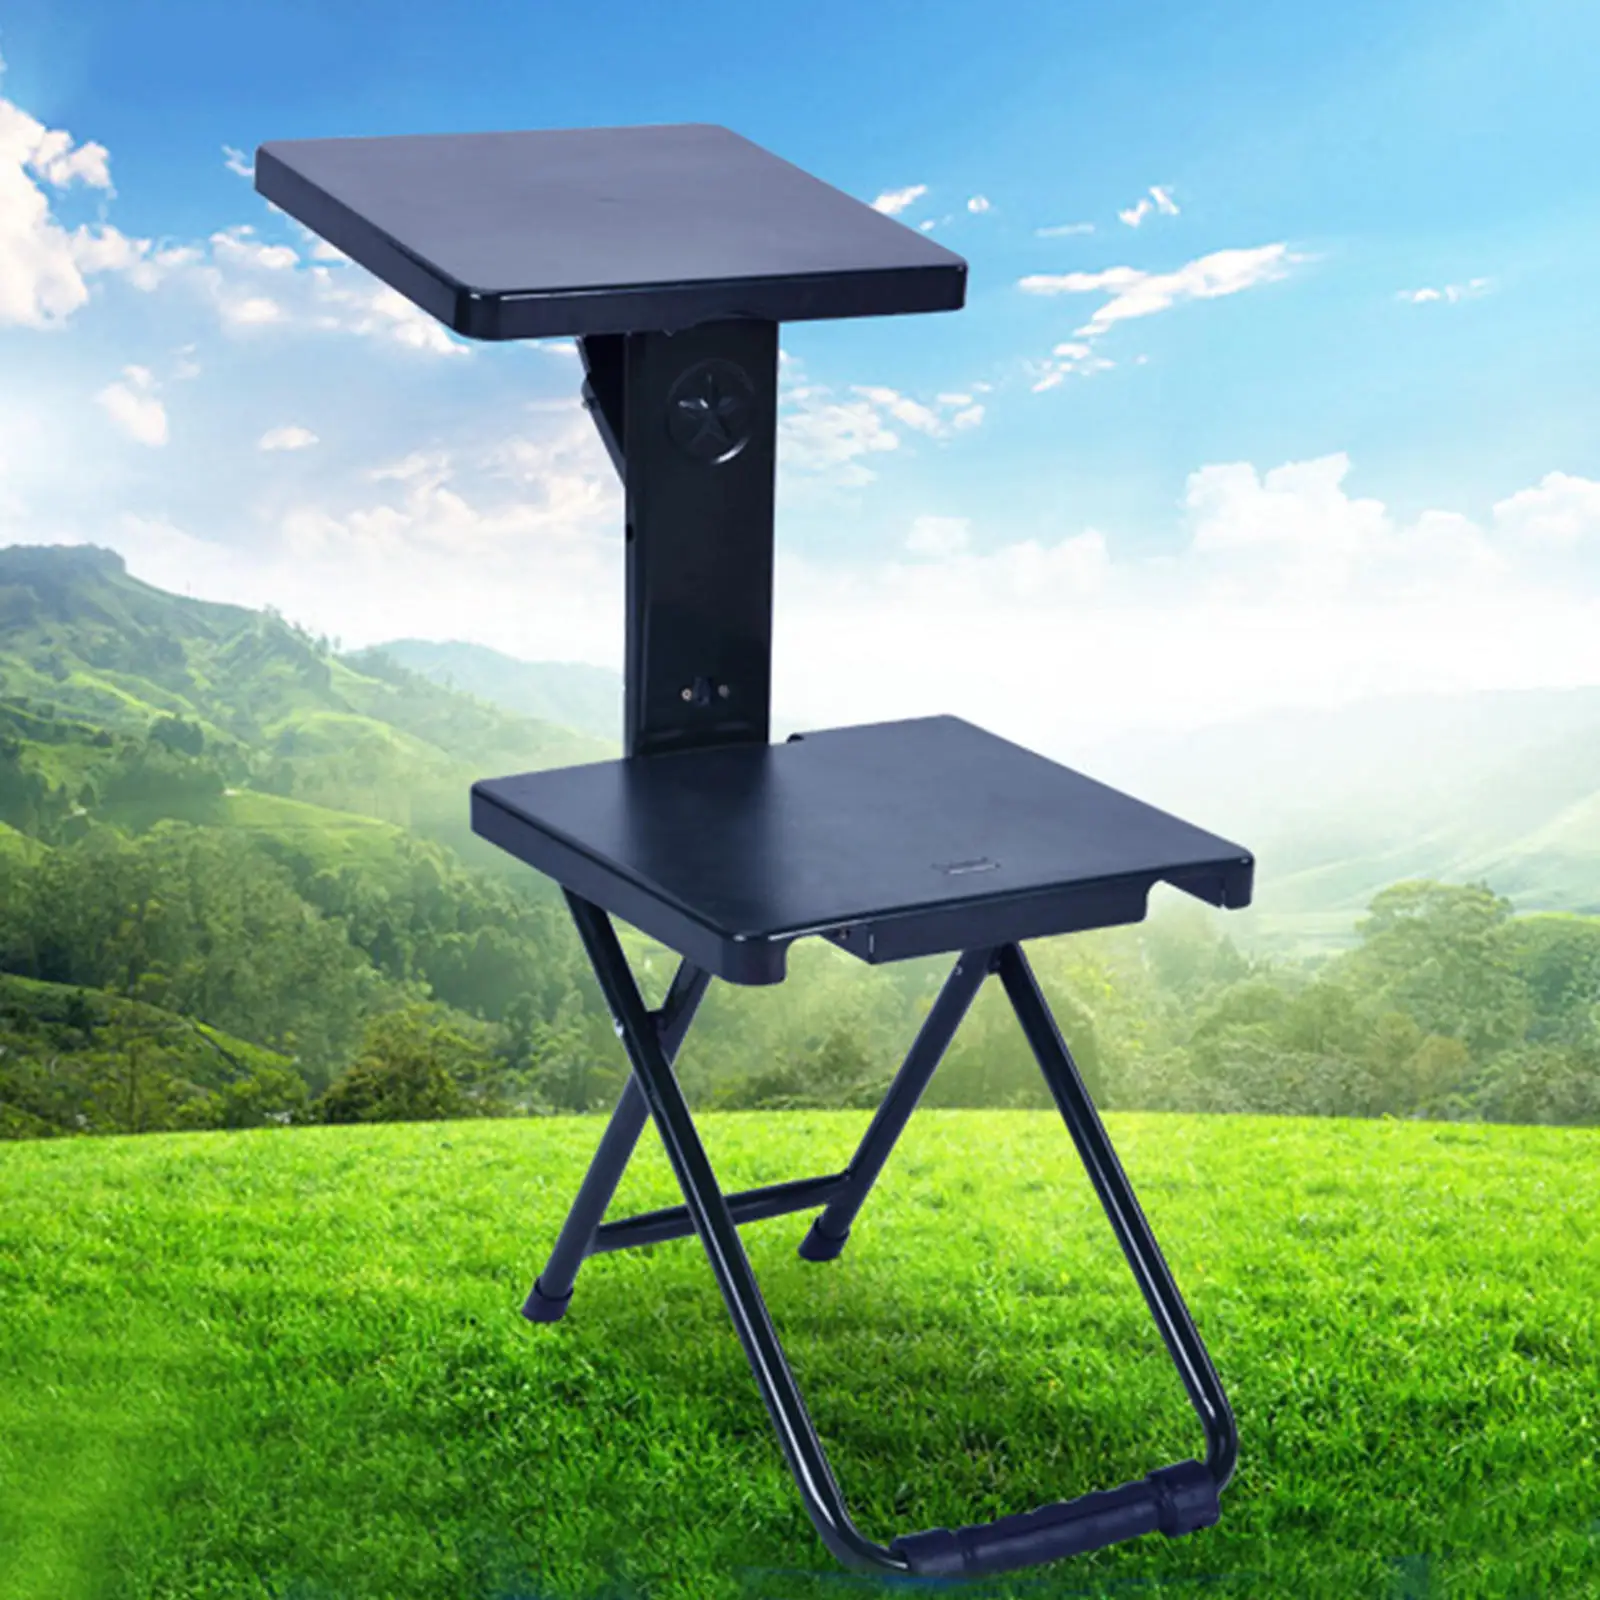 Portable Folding Chair Stool Seat ABS Multifunctional Hiking Leisure Writing Barbecue Beach Camp Hiking Support for Children